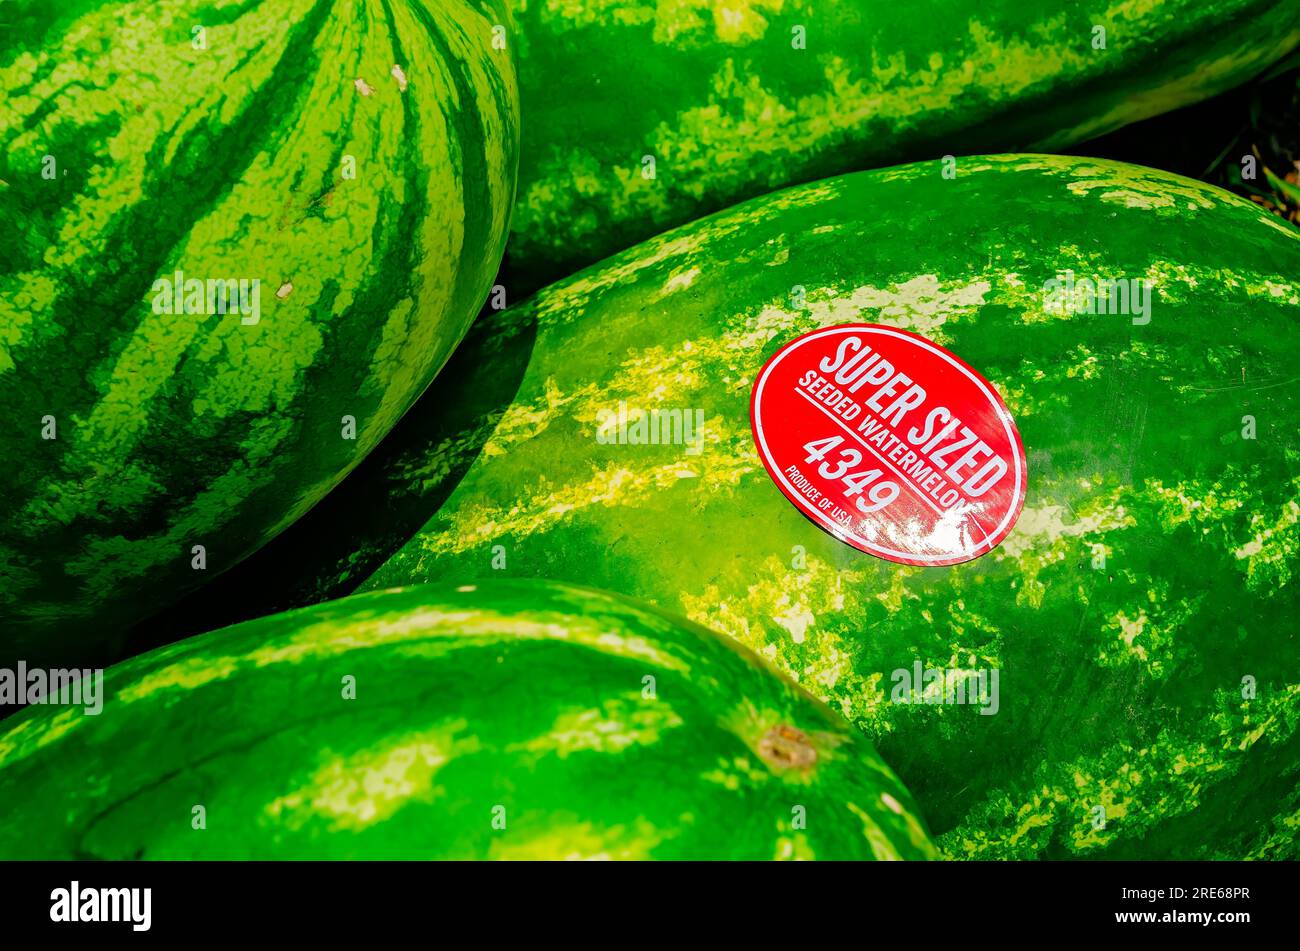 Super-sized, seeded watermelons are displayed at a farmstand, June 27, 2023, in Mobile, Alabama. Watermelon is cultivated throughout the world. Stock Photo